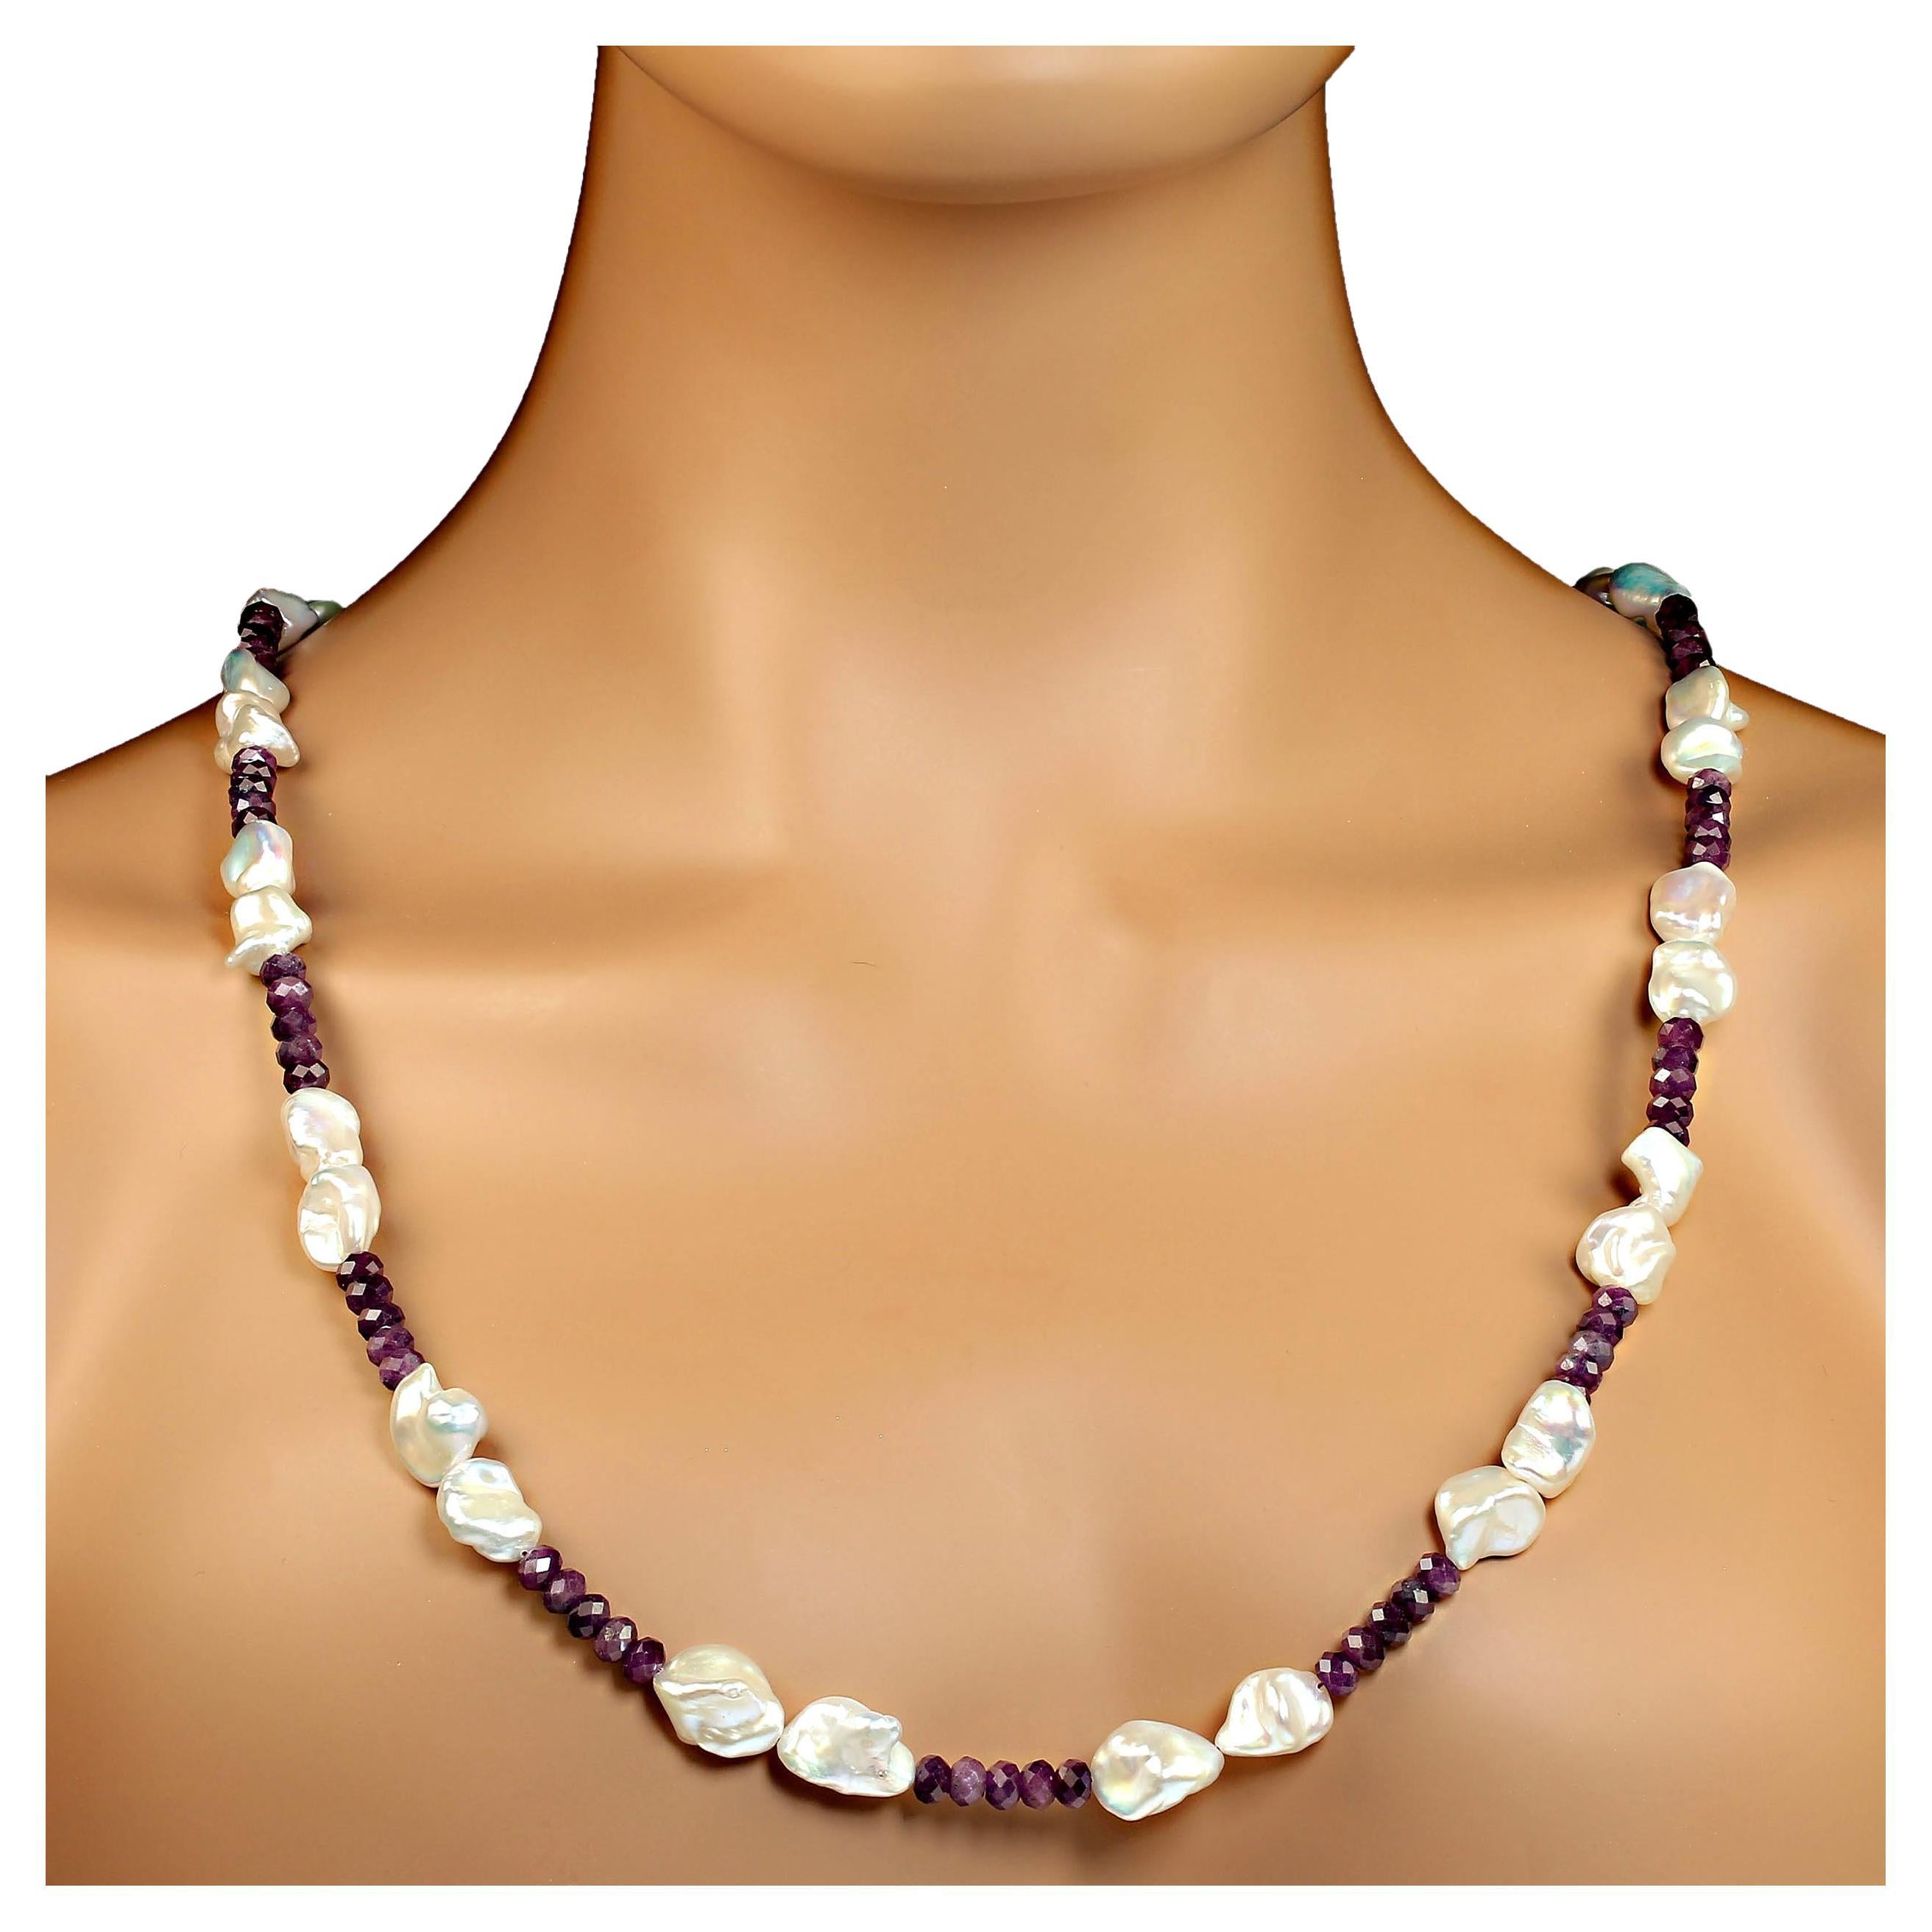 30 Inch necklace of faceted matte 6mm natural ruby rondelles and white Chinese freshwater pearls.  This one-of-a-kind necklace is finished with a diamond studded gold vermeil lobster claw clasp.  MN2336